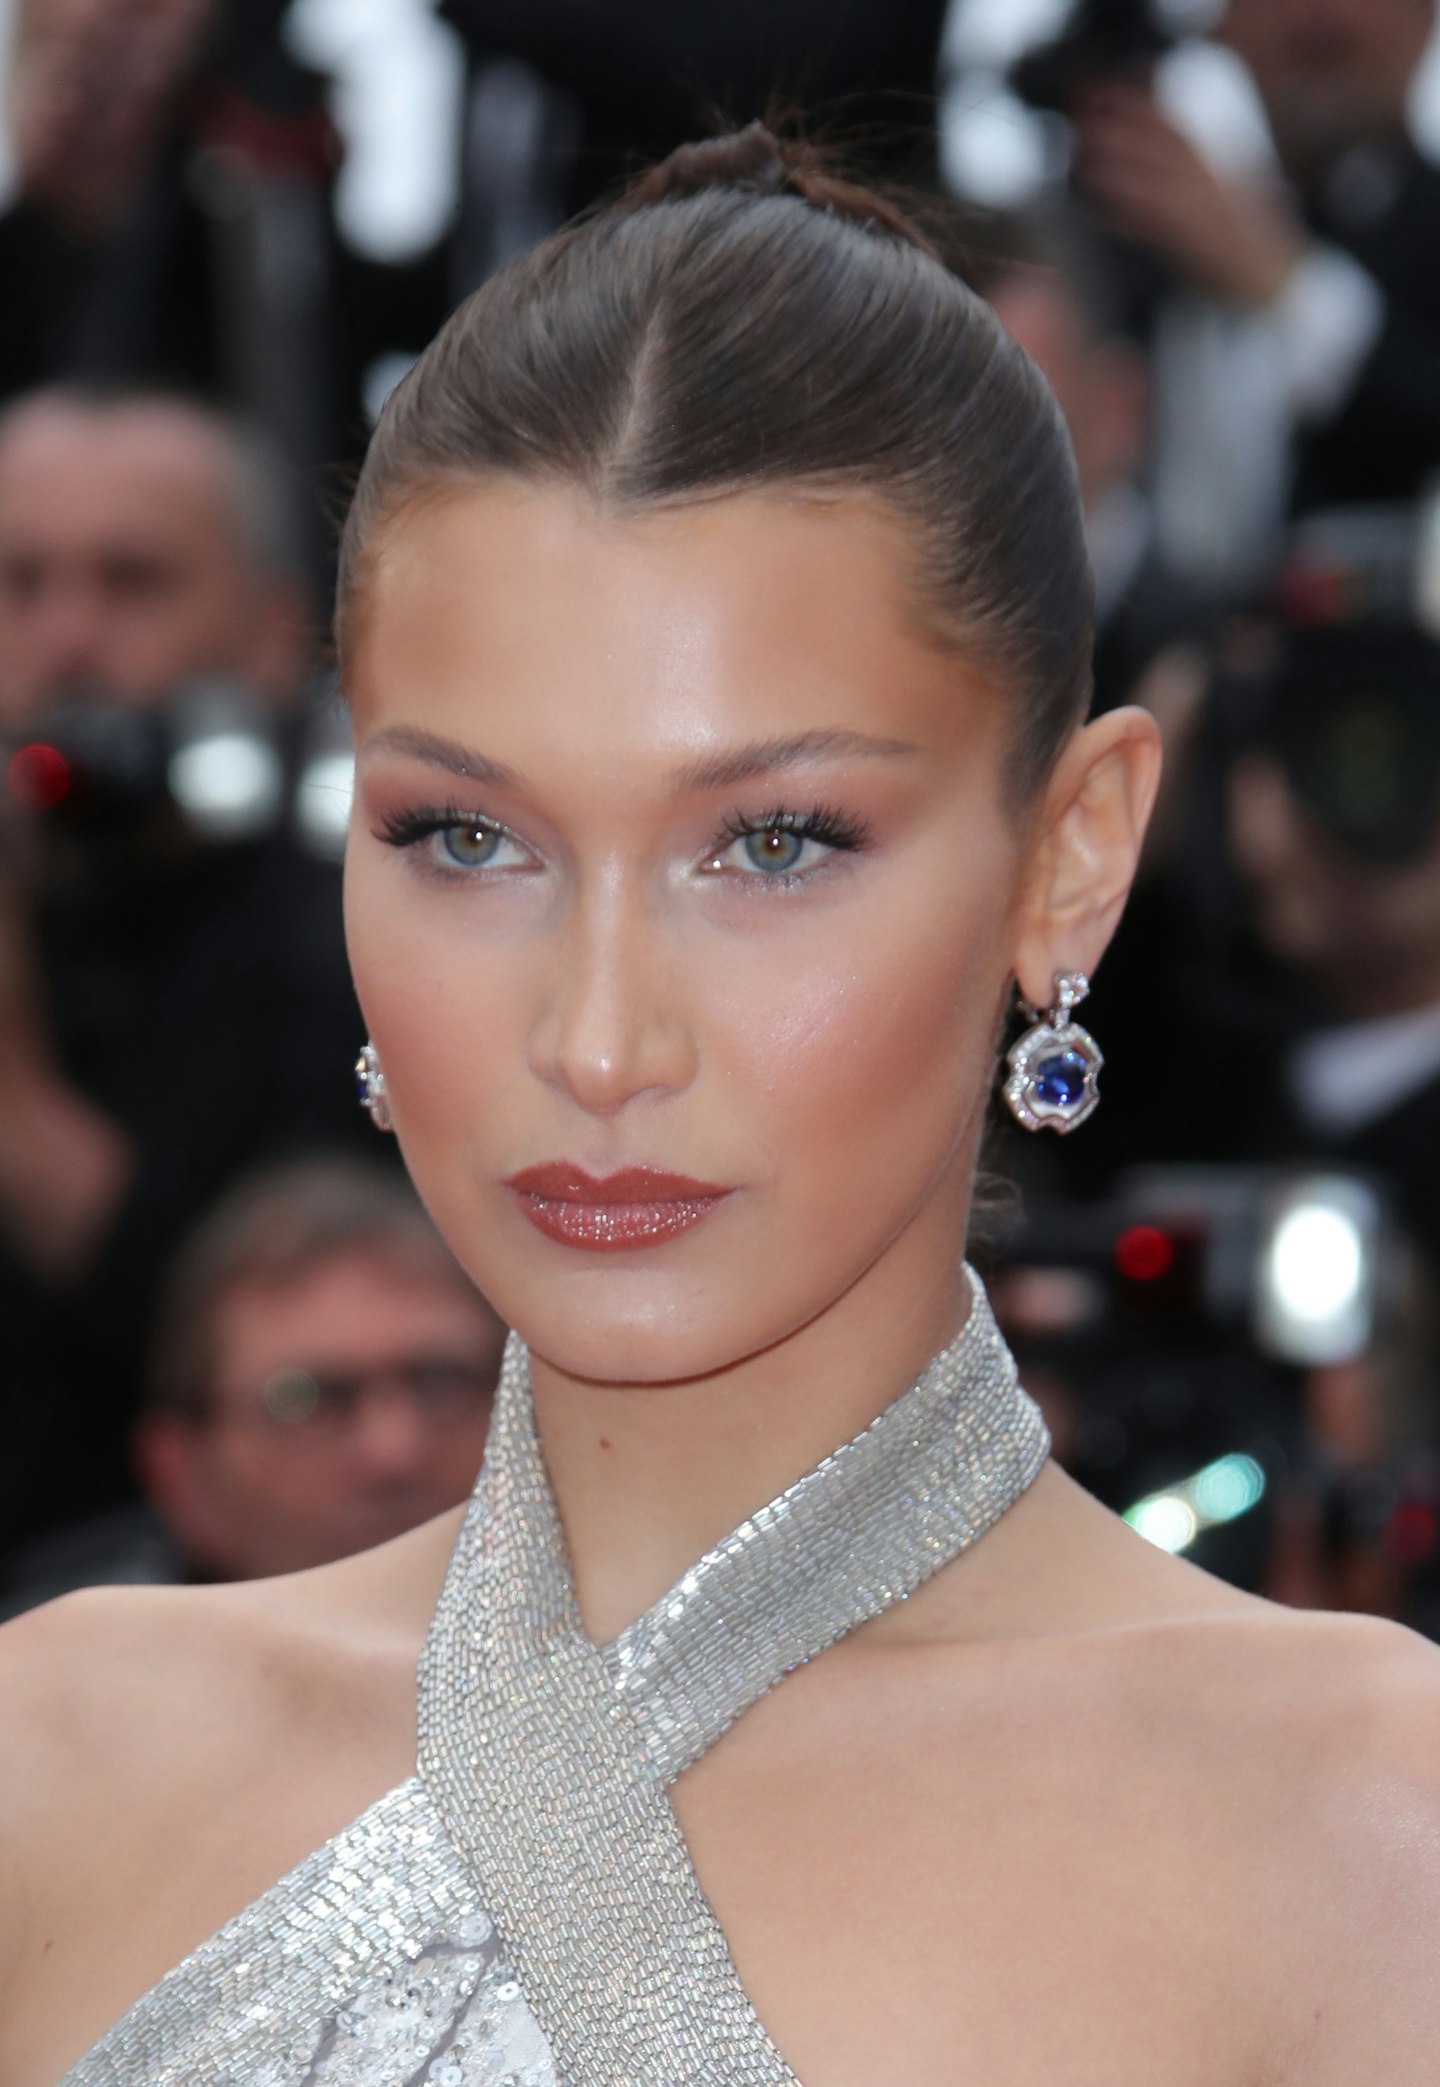 The Cannes Hairstyle That Will Take You 30 Seconds To Copy